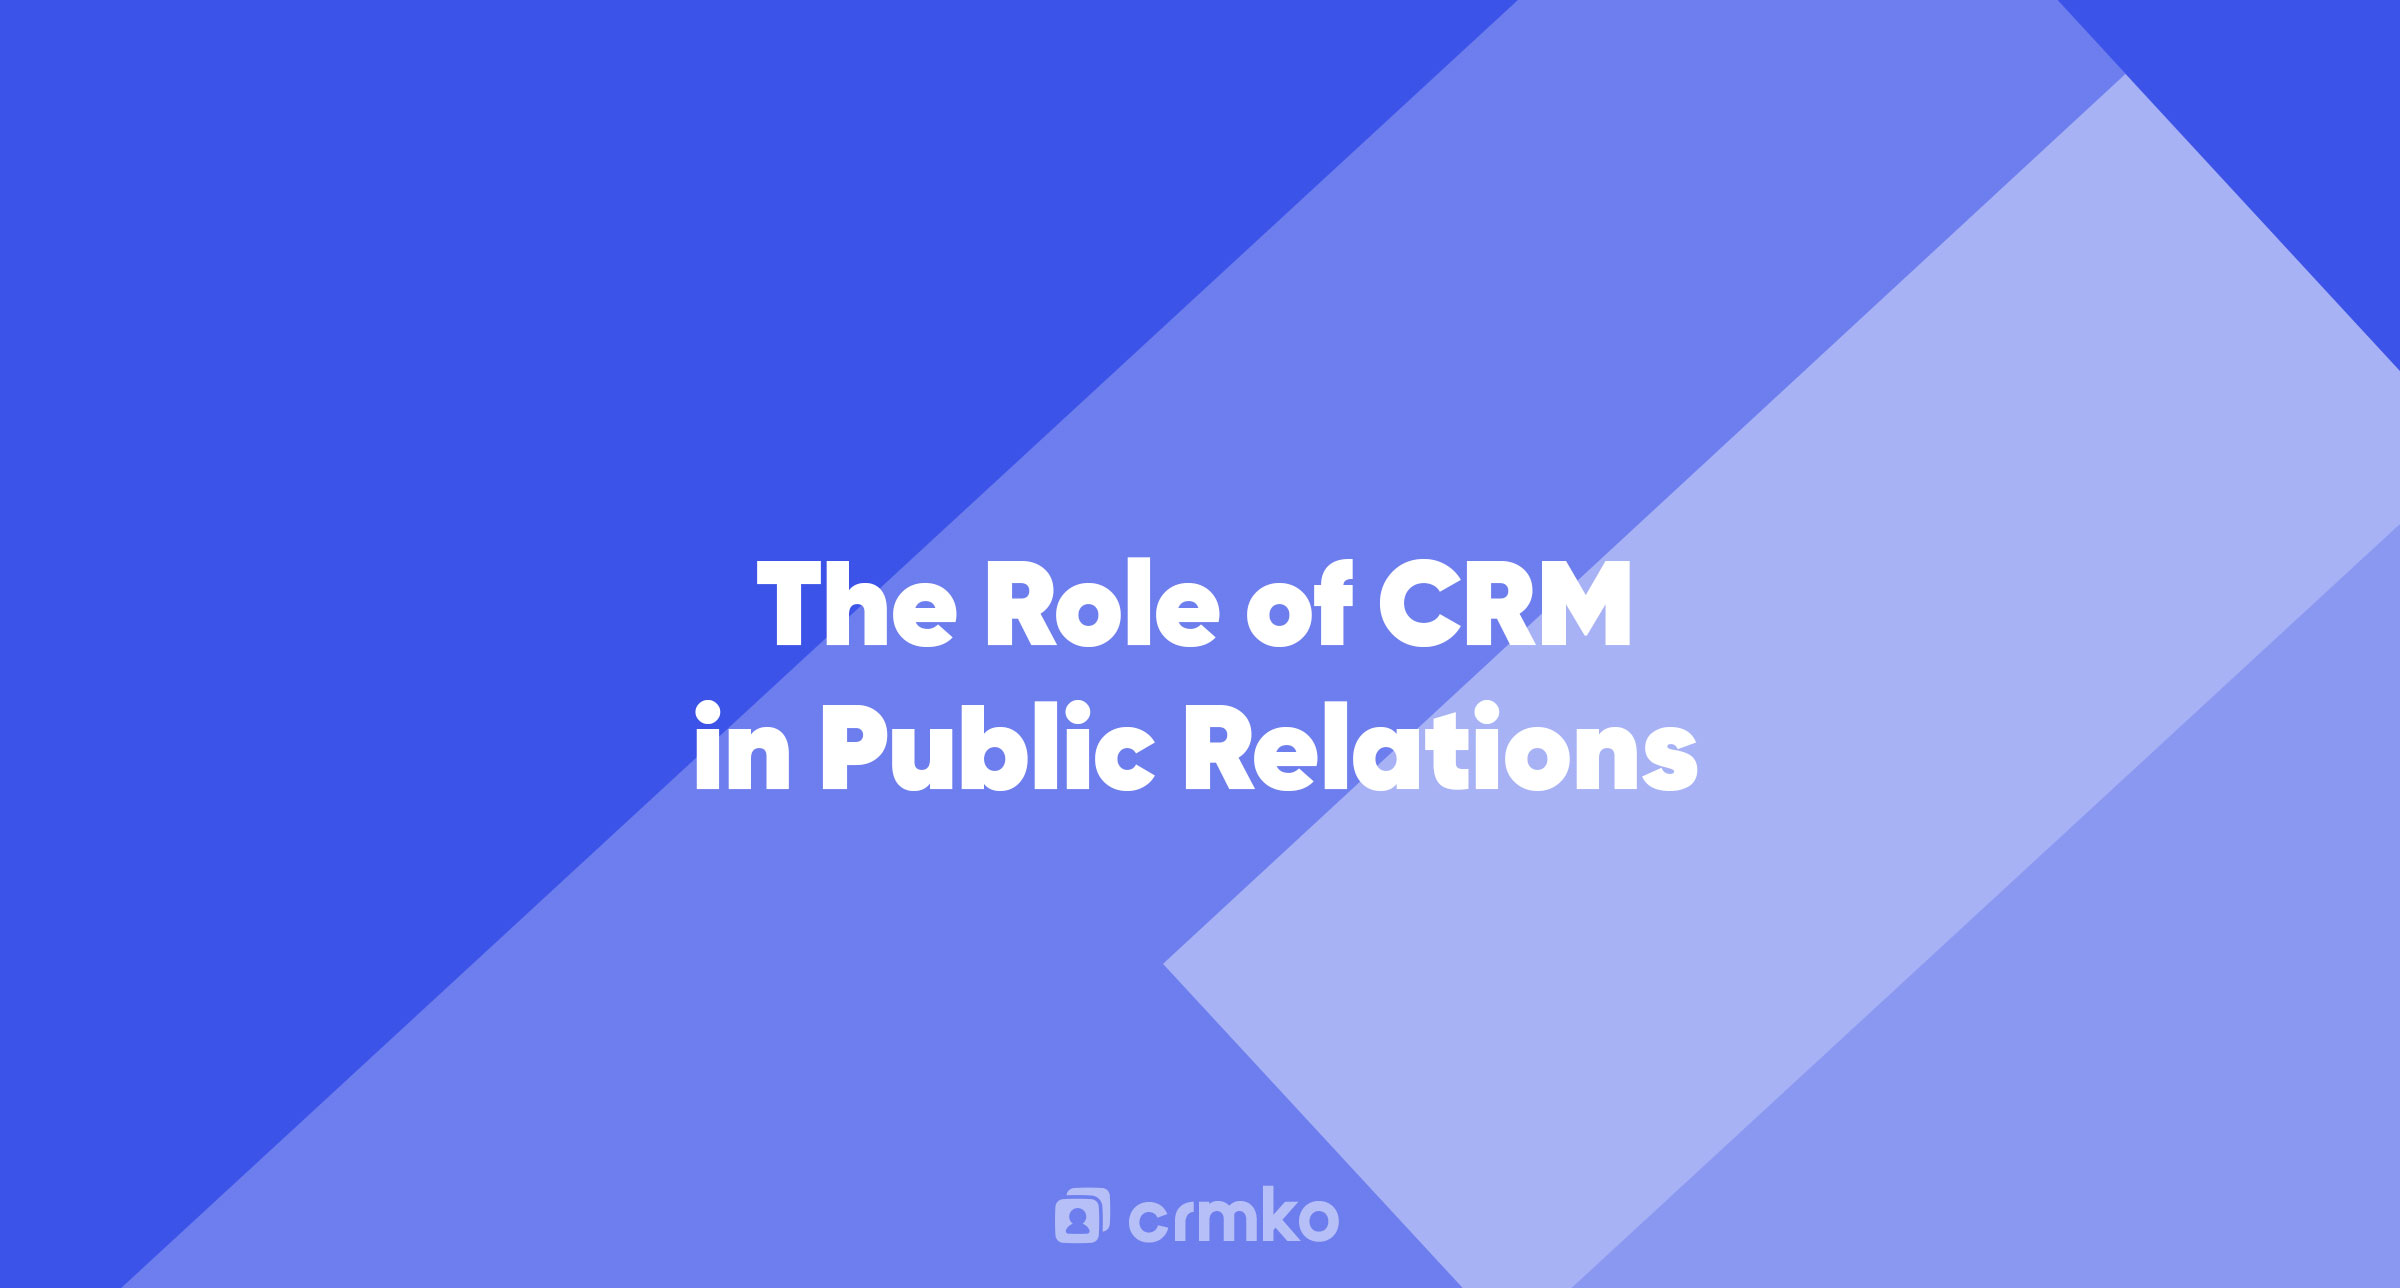 Article | The Role of CRM in Public Relations